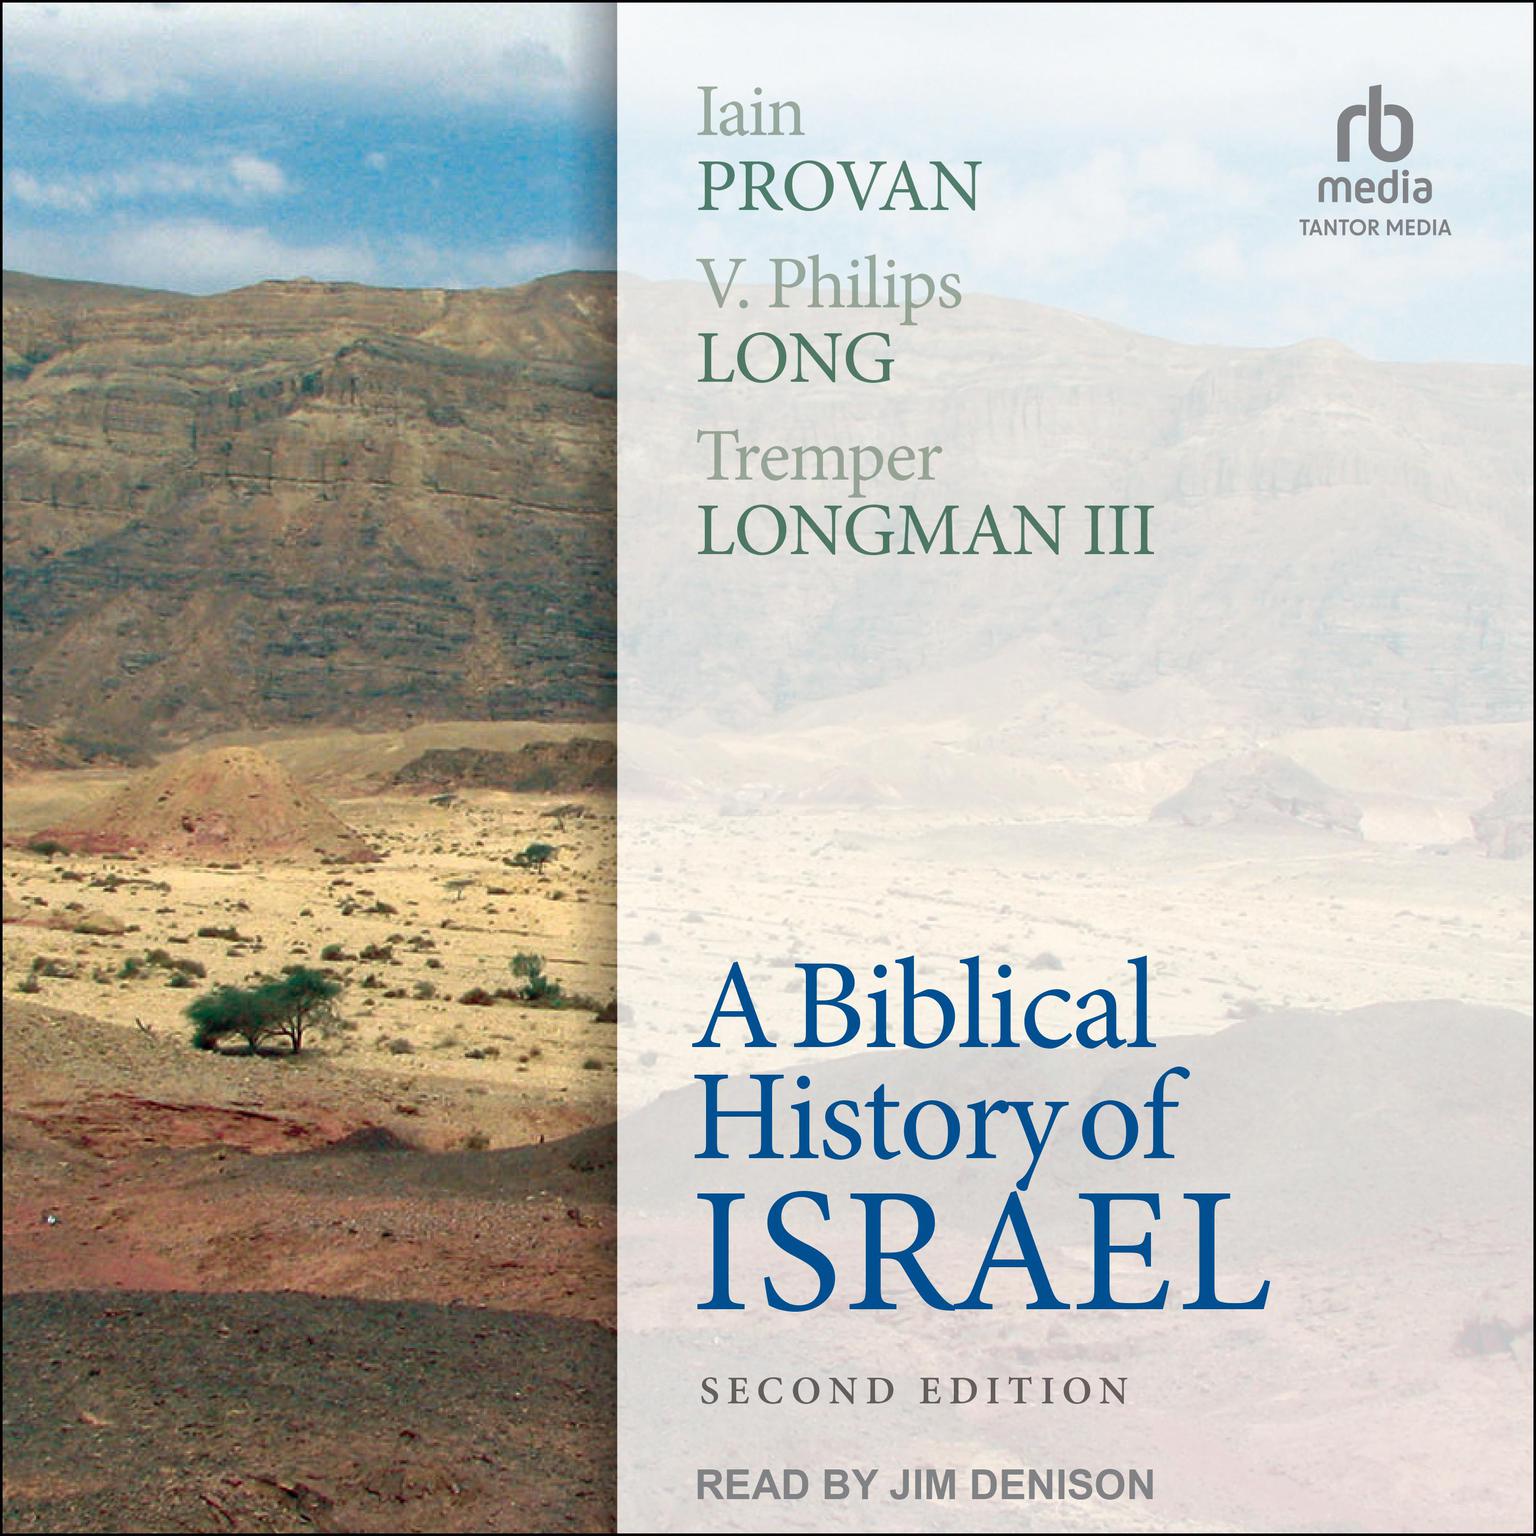 A Biblical History of Israel, Second Edition Audiobook, by Iain Provan